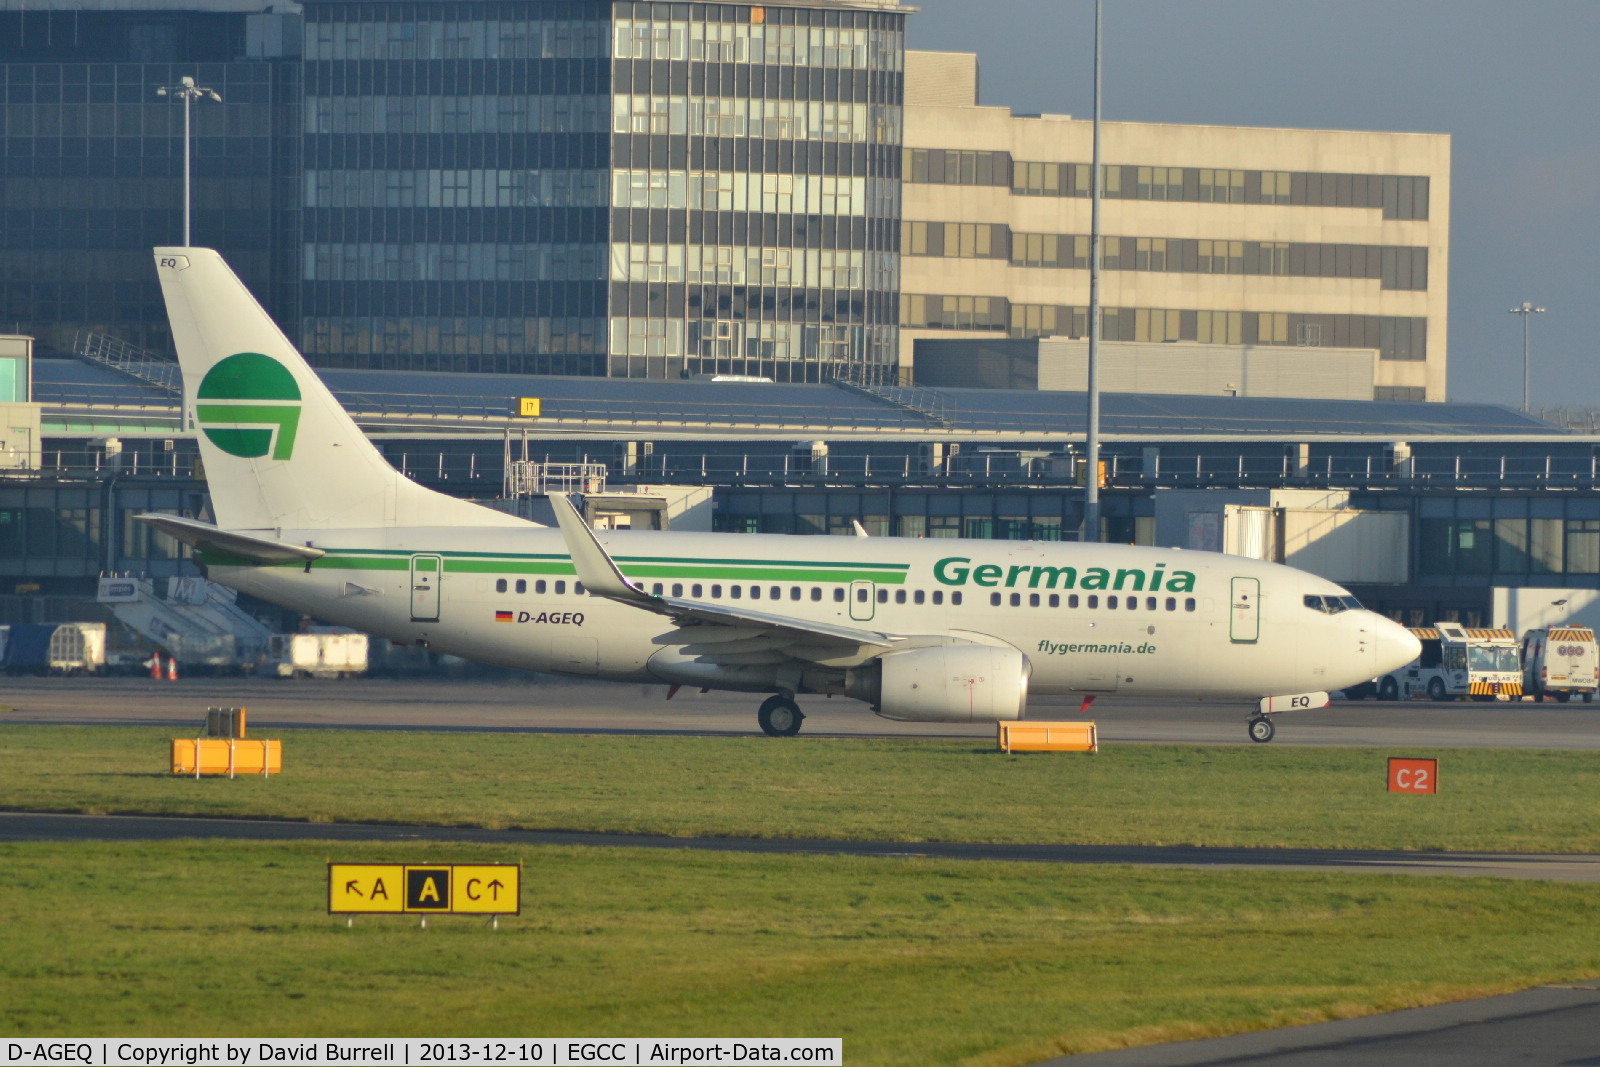 D-AGEQ, 1998 Boeing 737-75B C/N 28103, Germania D-AGEQ Boeing 737-75B taxiing at Manchester Airport.